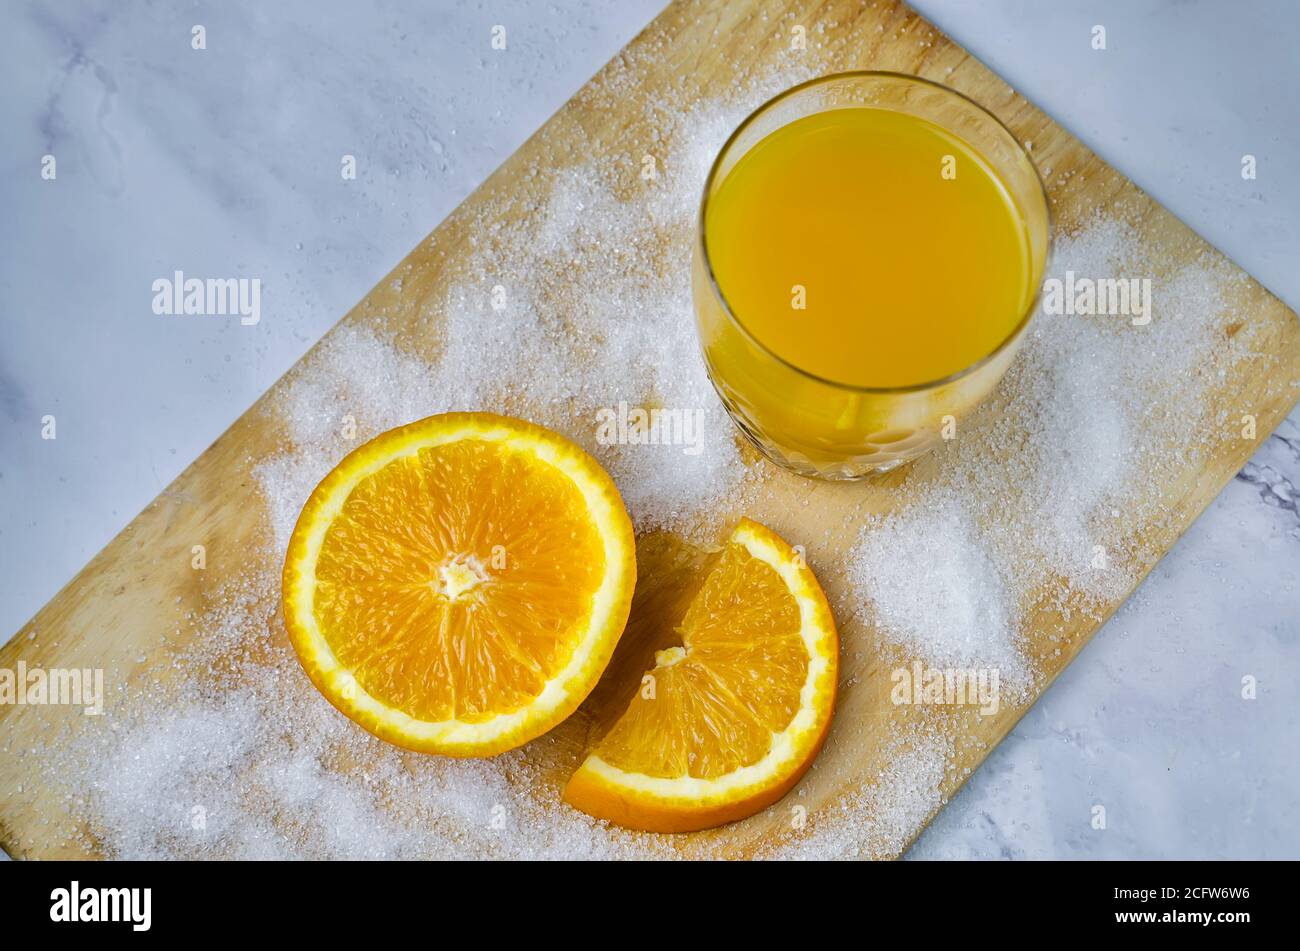 Healthy food and drink from fresh oranges  Stock Photo